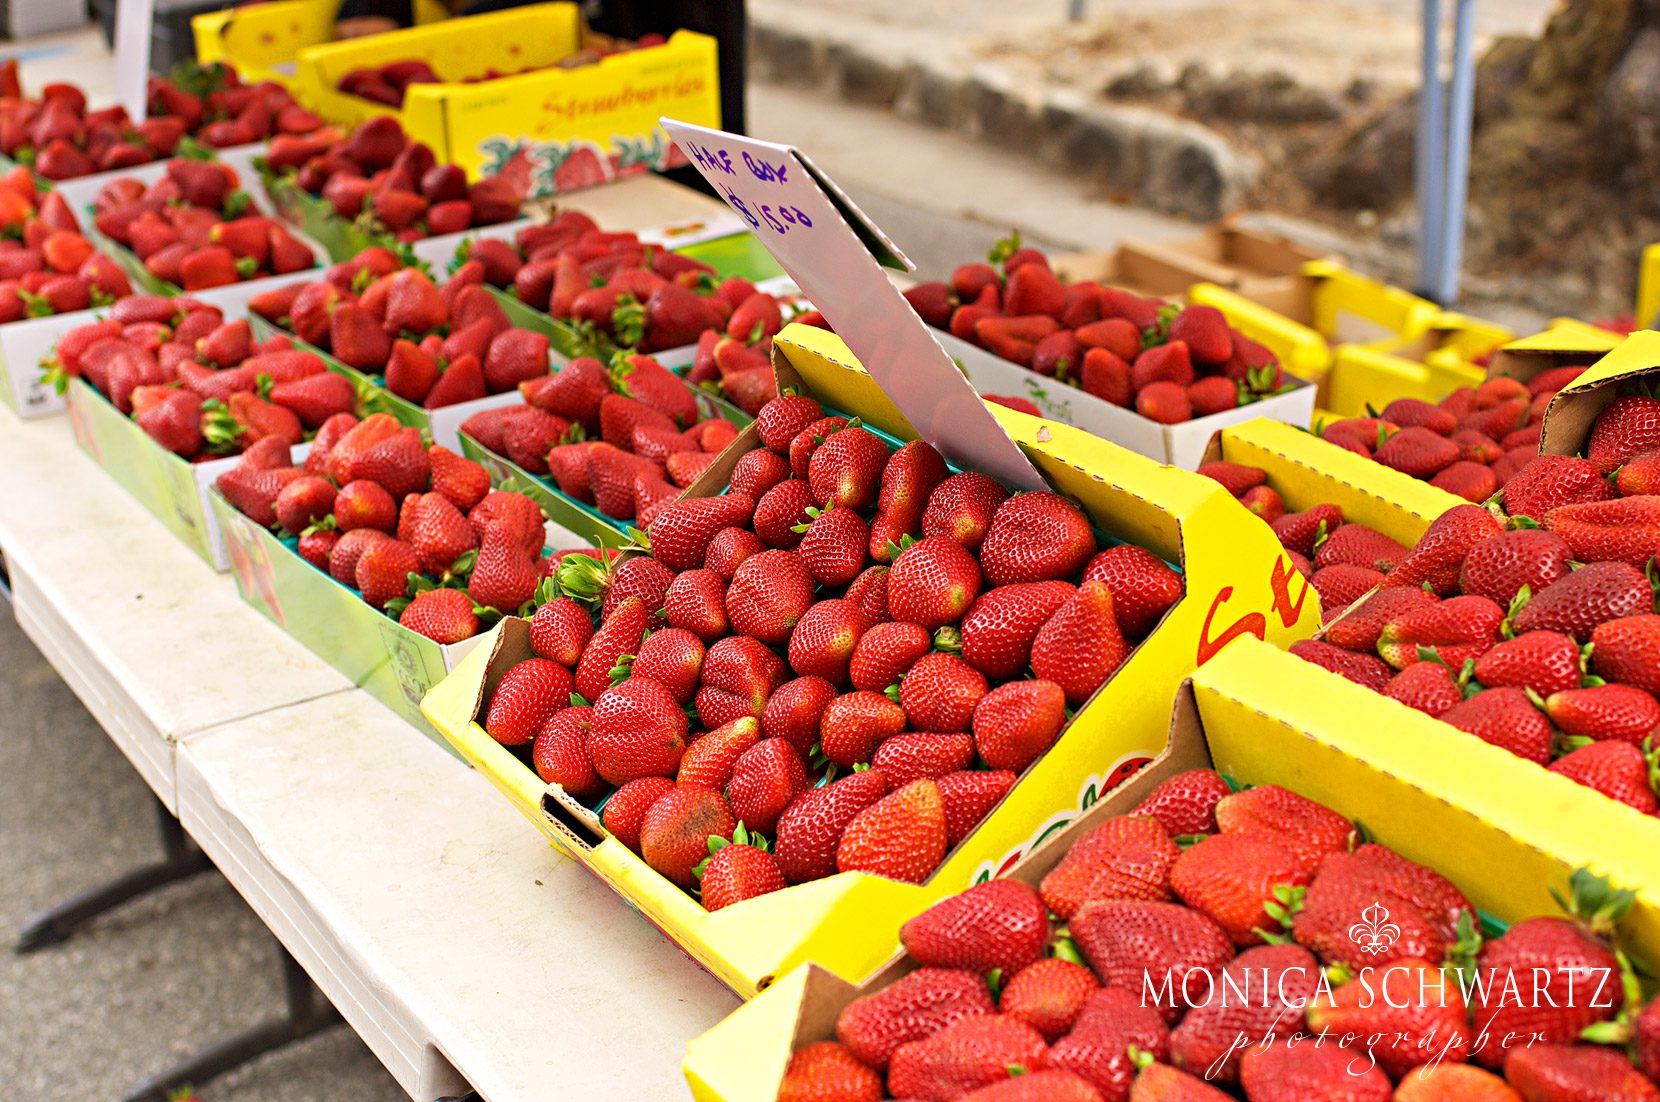 Strawberries-at-the-farmers-market-in-Carmel-by-the-Sea-California